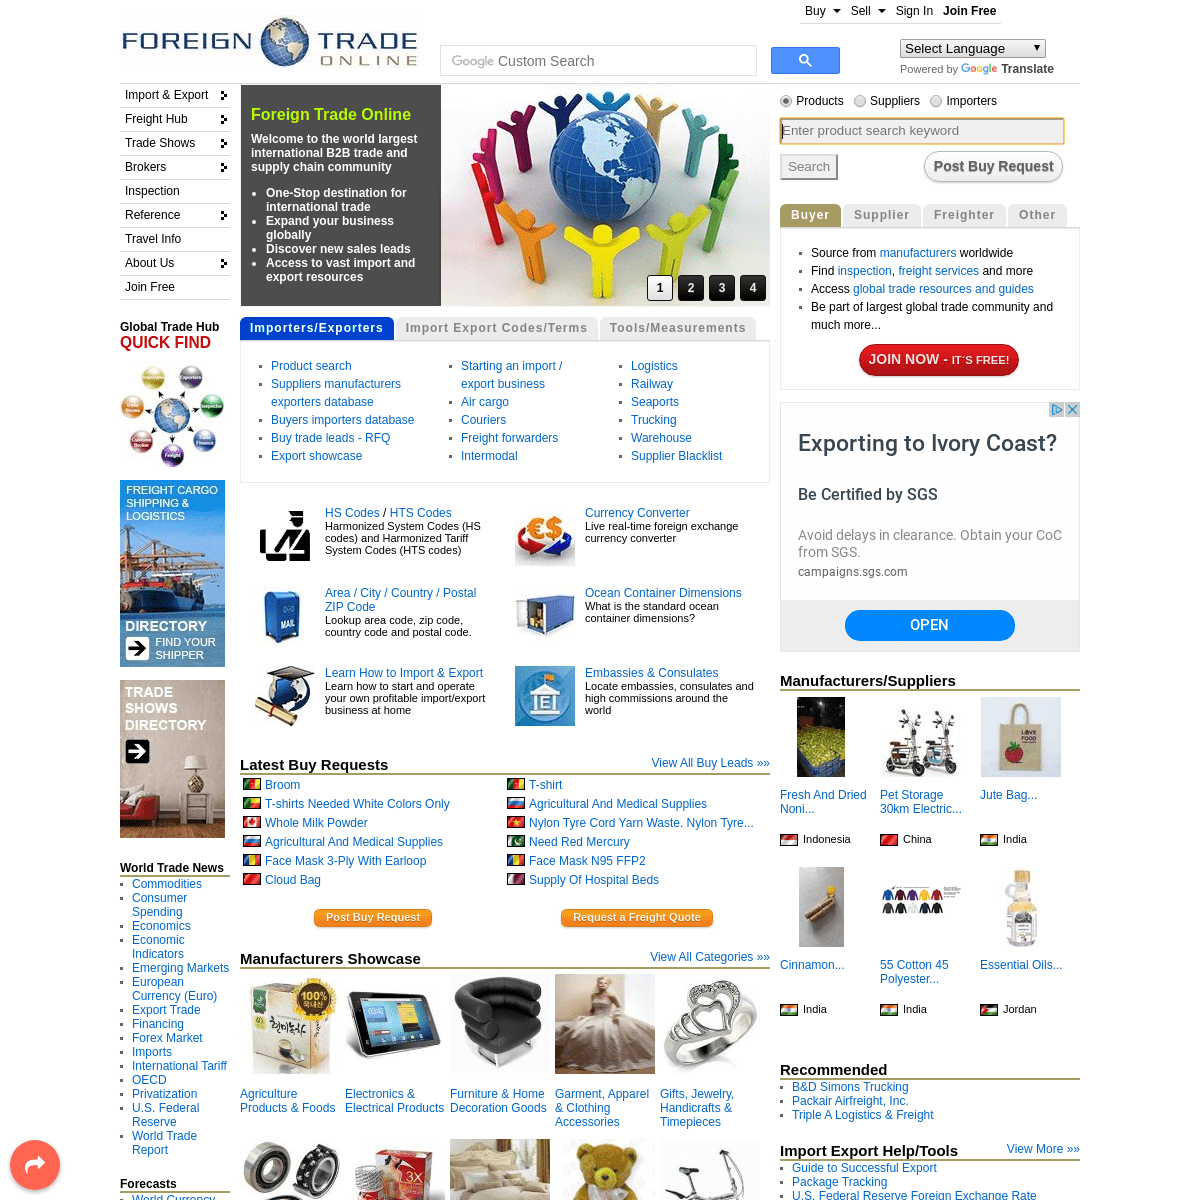 A complete backup of foreign-trade.com